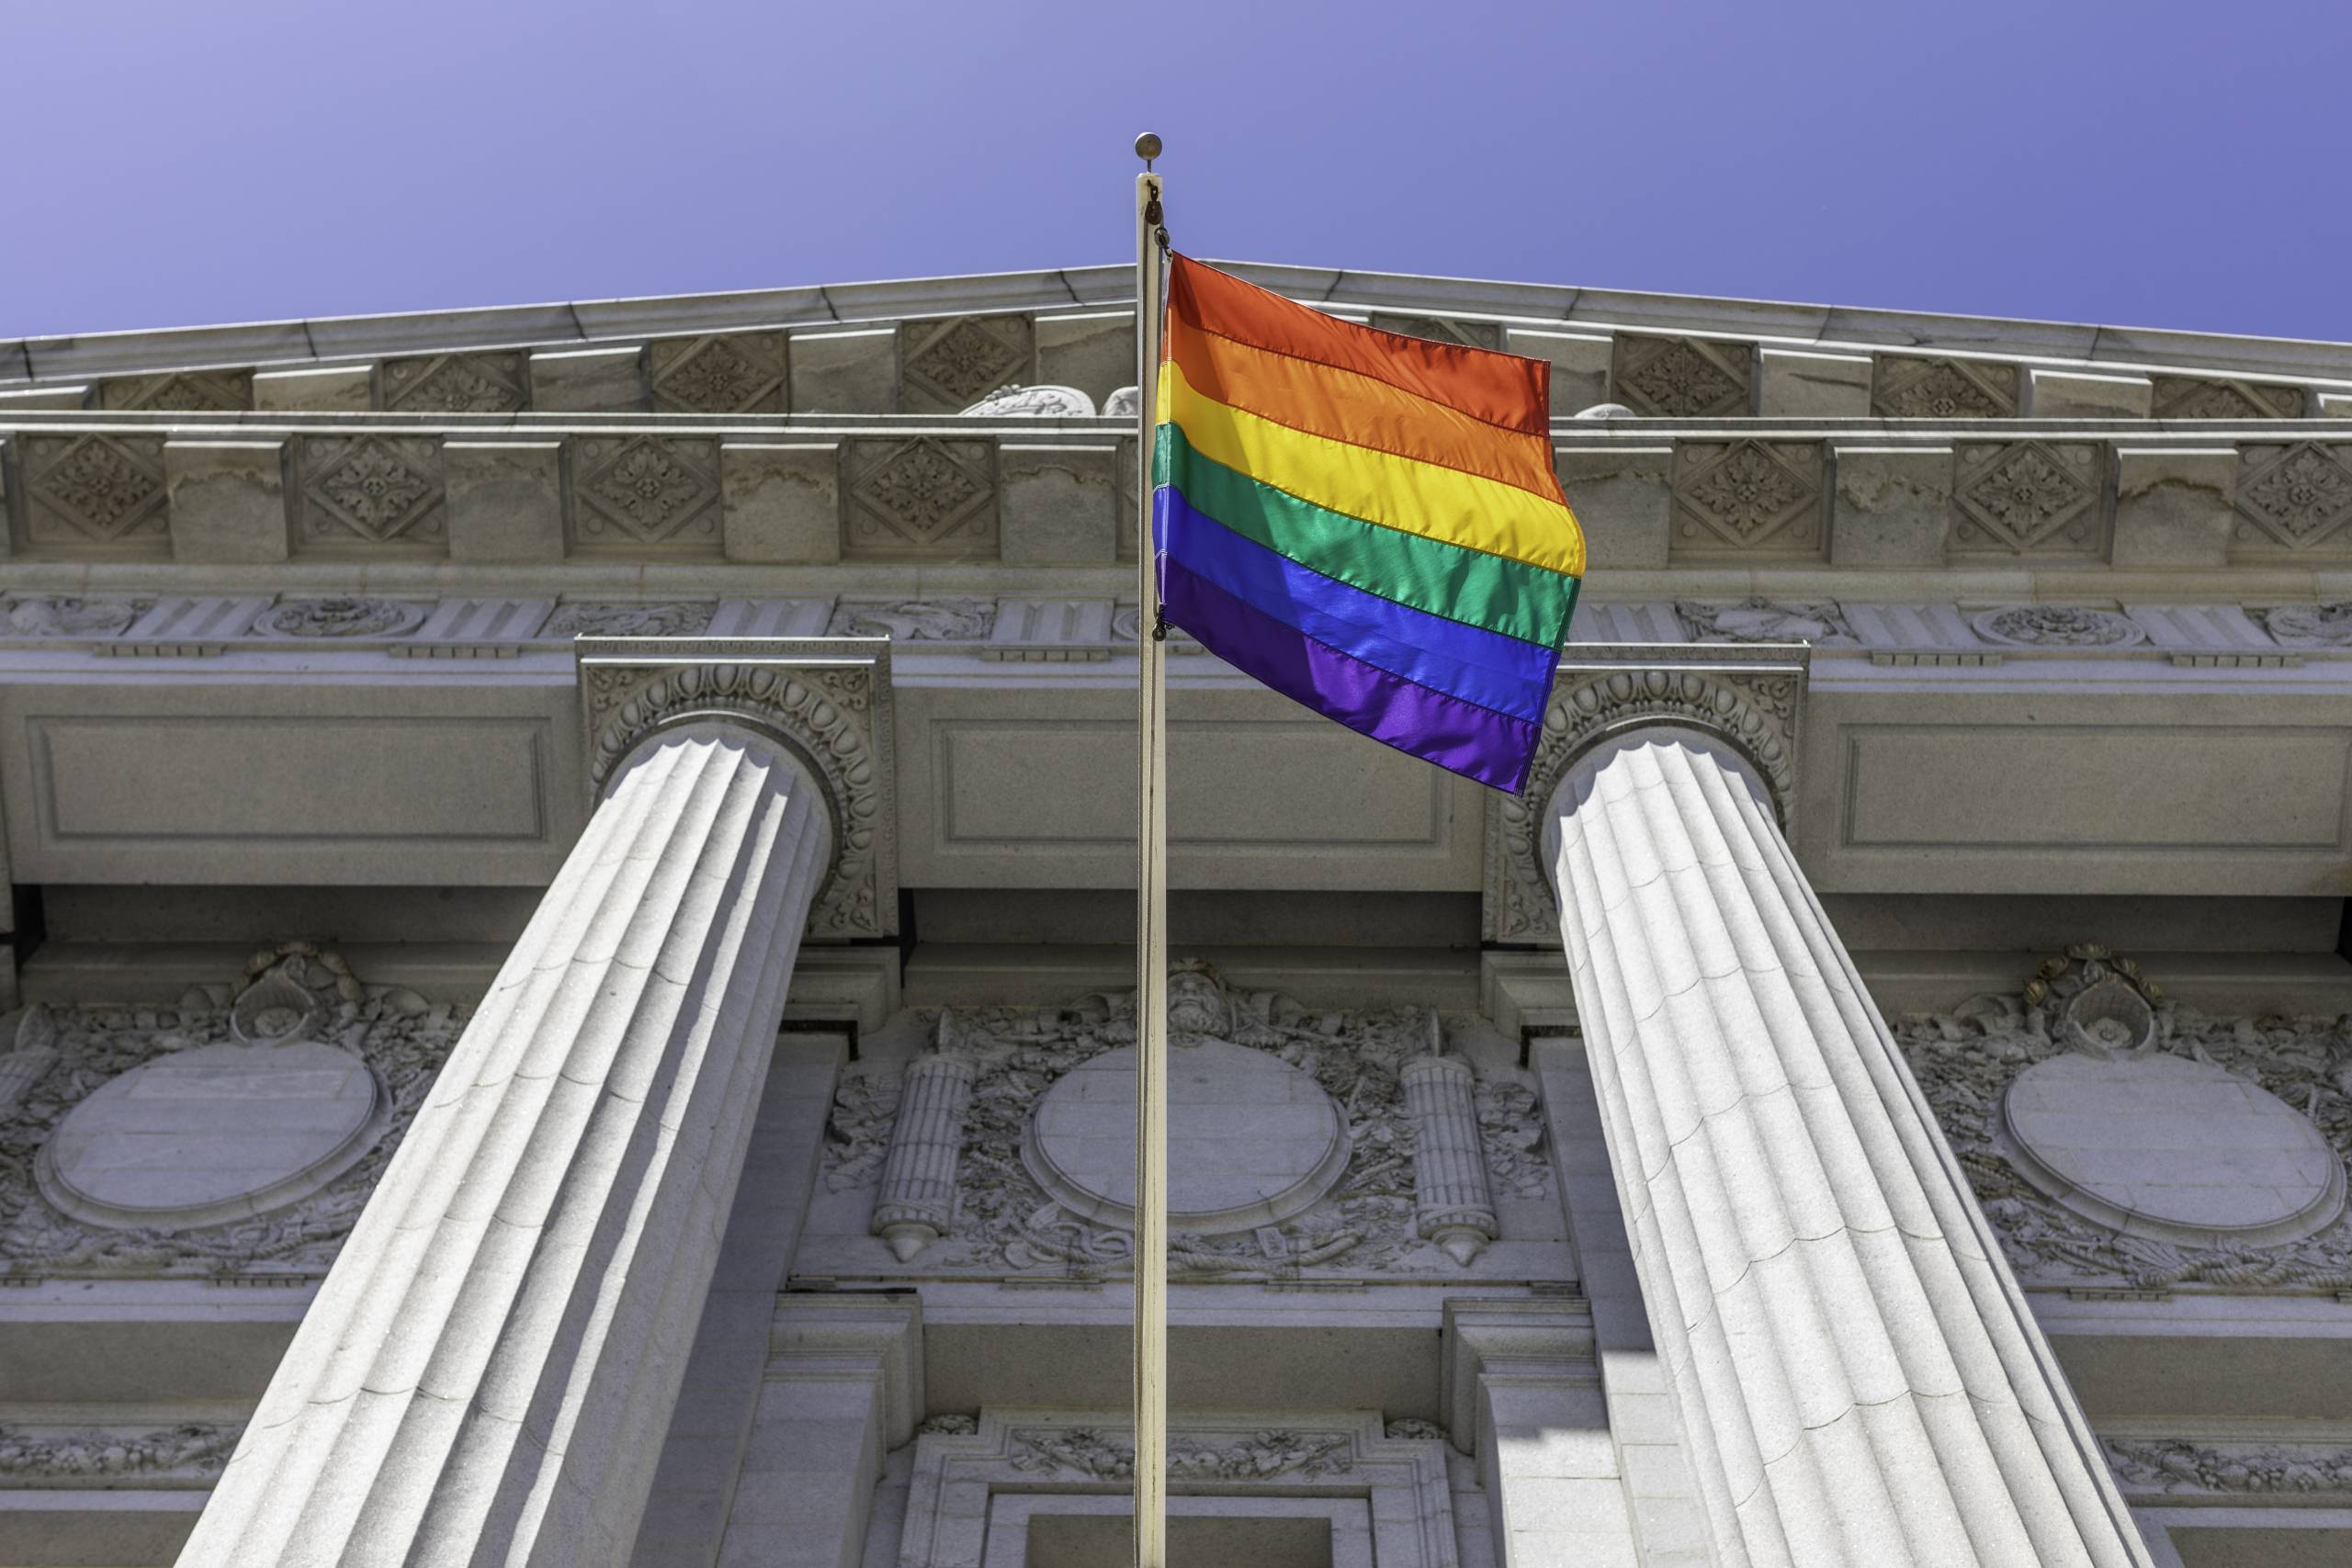 A rainbow flag hangs over a government building.